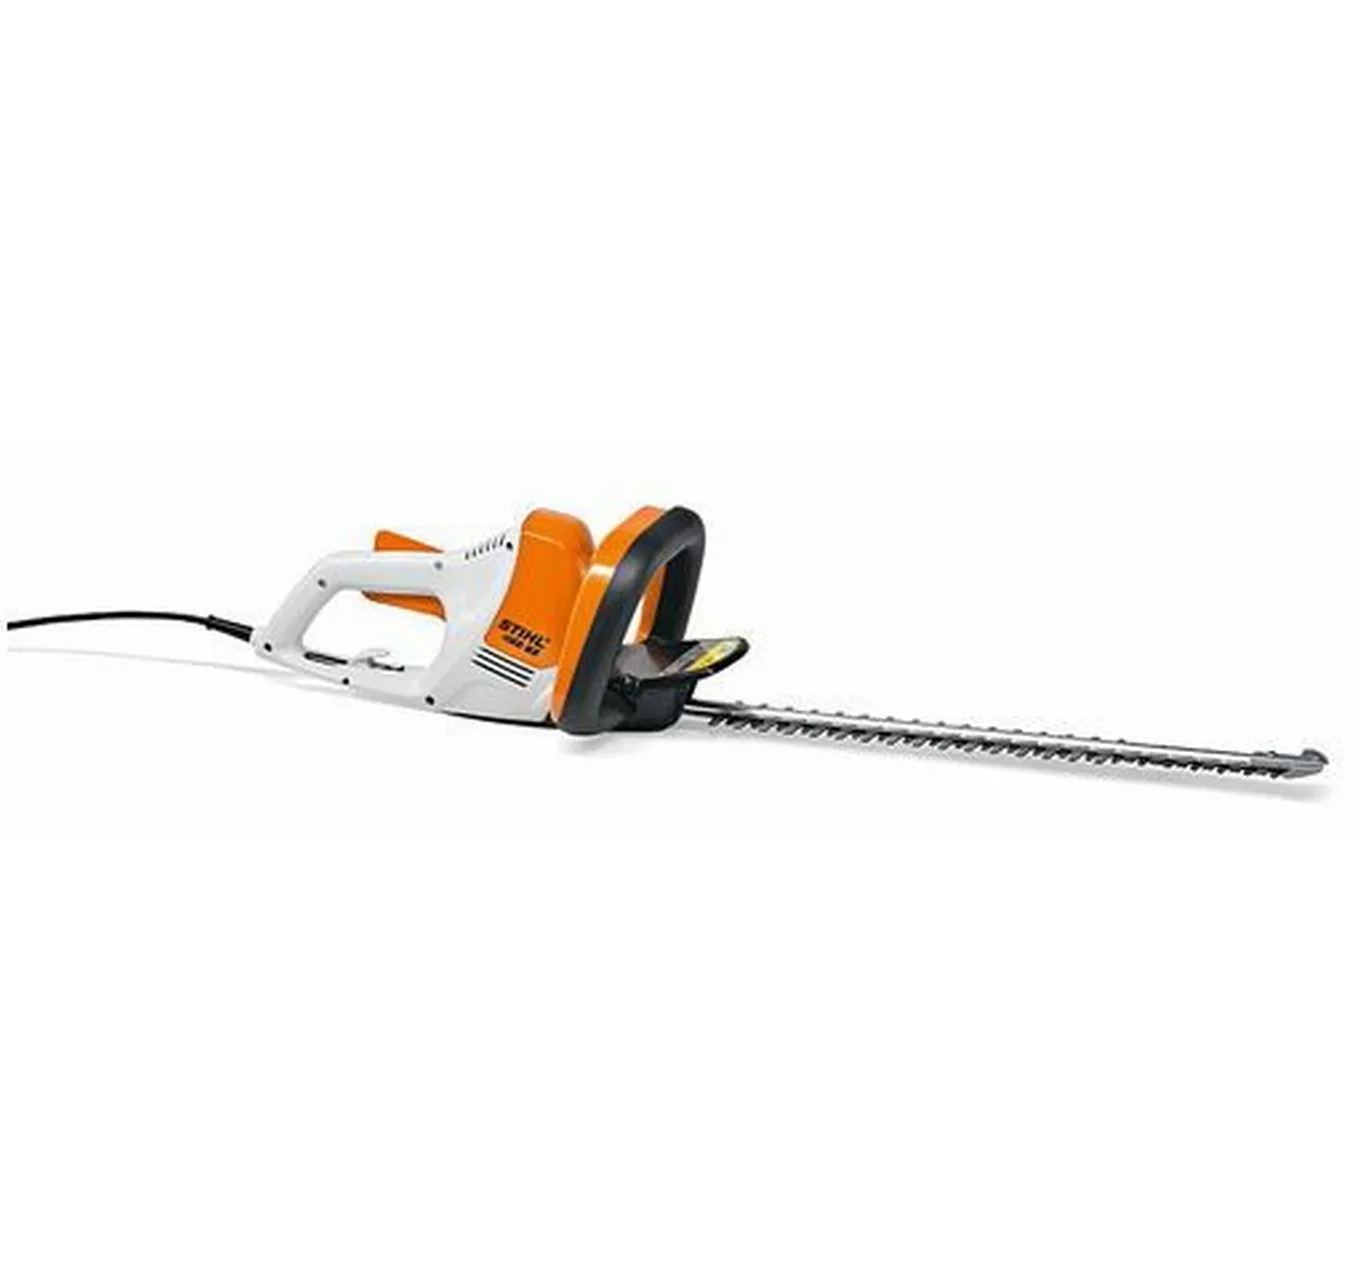 HSE 52 Hedge Trimmer 20"